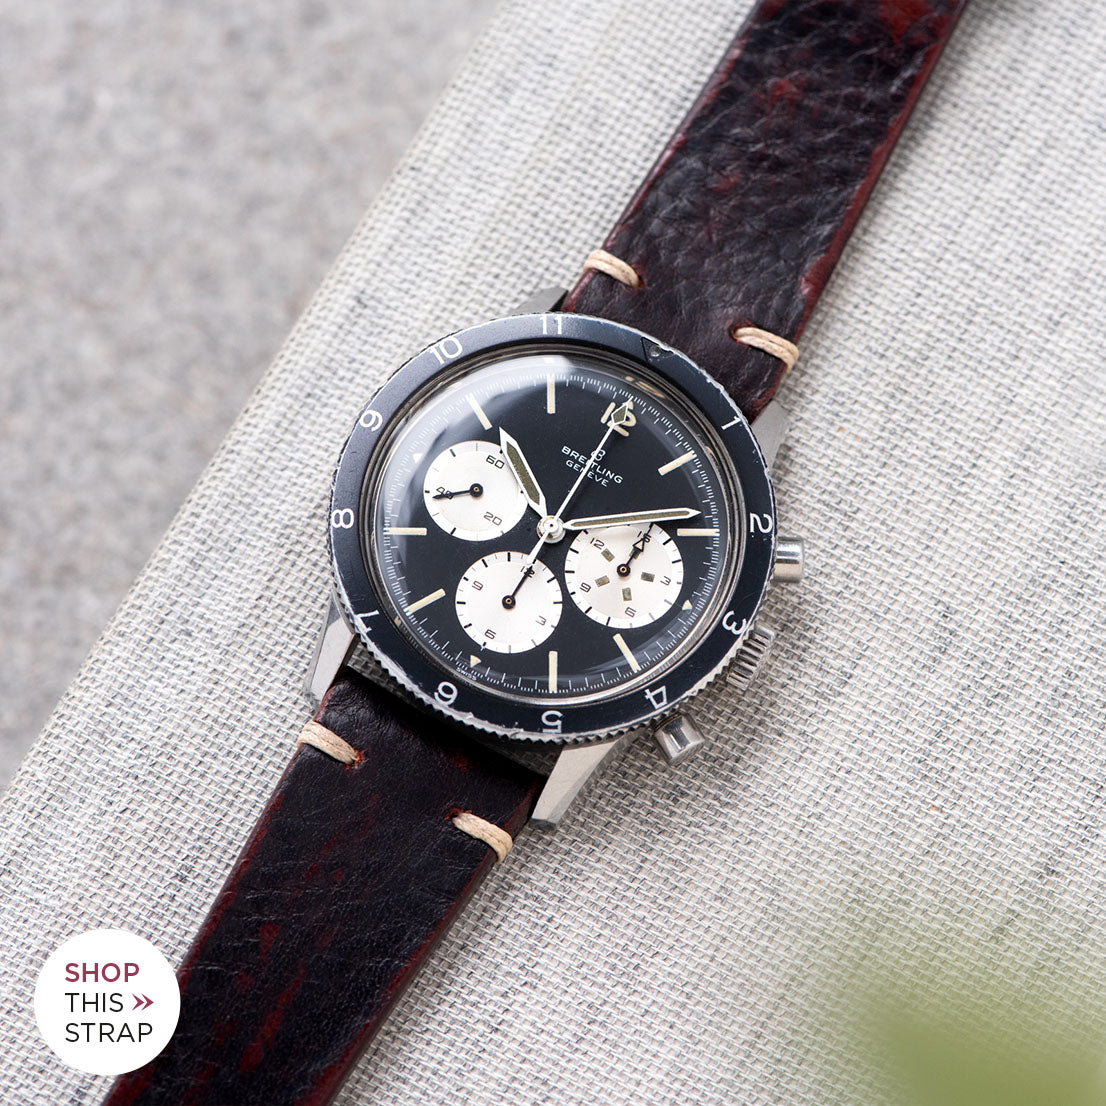 Bulang and Sons_Strap Guide_The Breitling Co-Pilot 7650 Chronograph_Diablo Black Leather Watch Strap